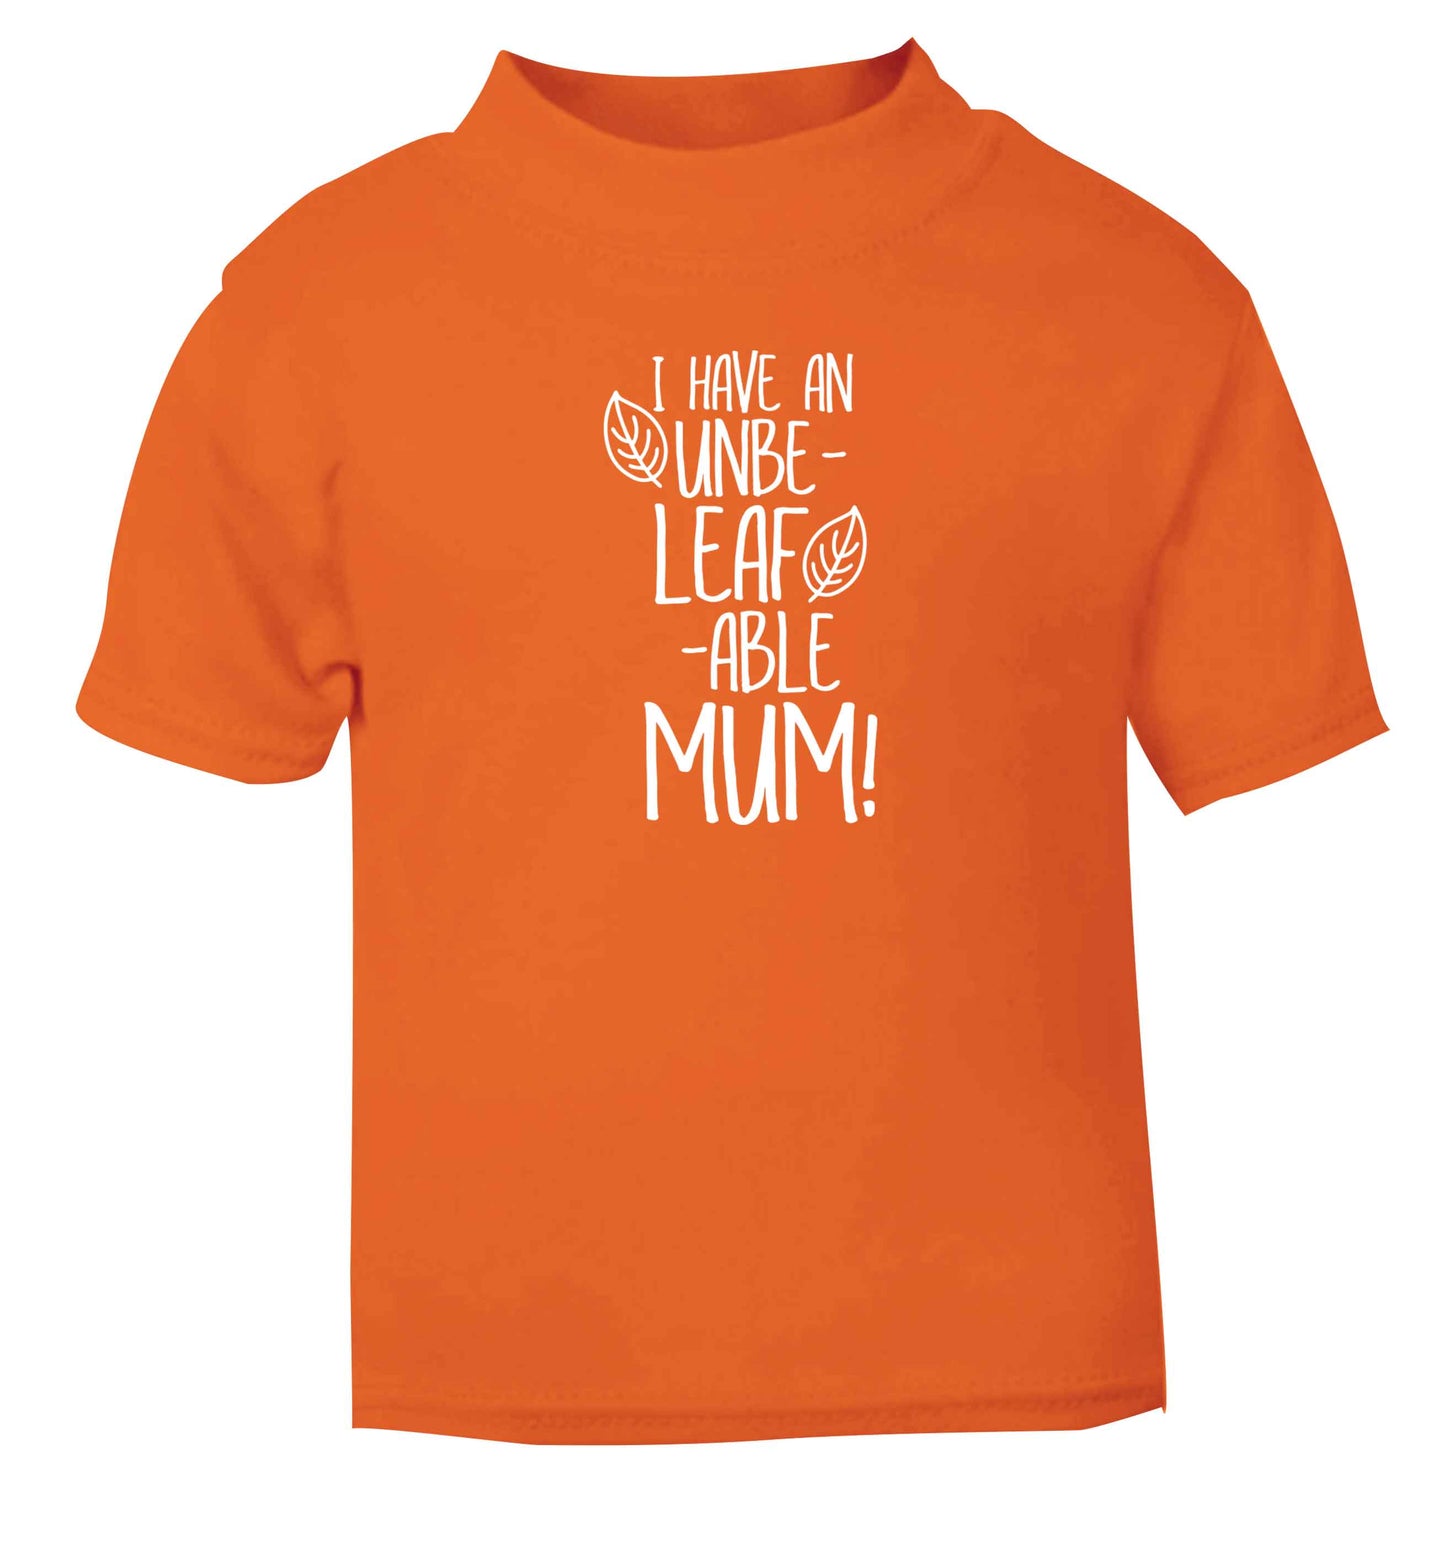 I have an unbeleafable mum! orange baby toddler Tshirt 2 Years